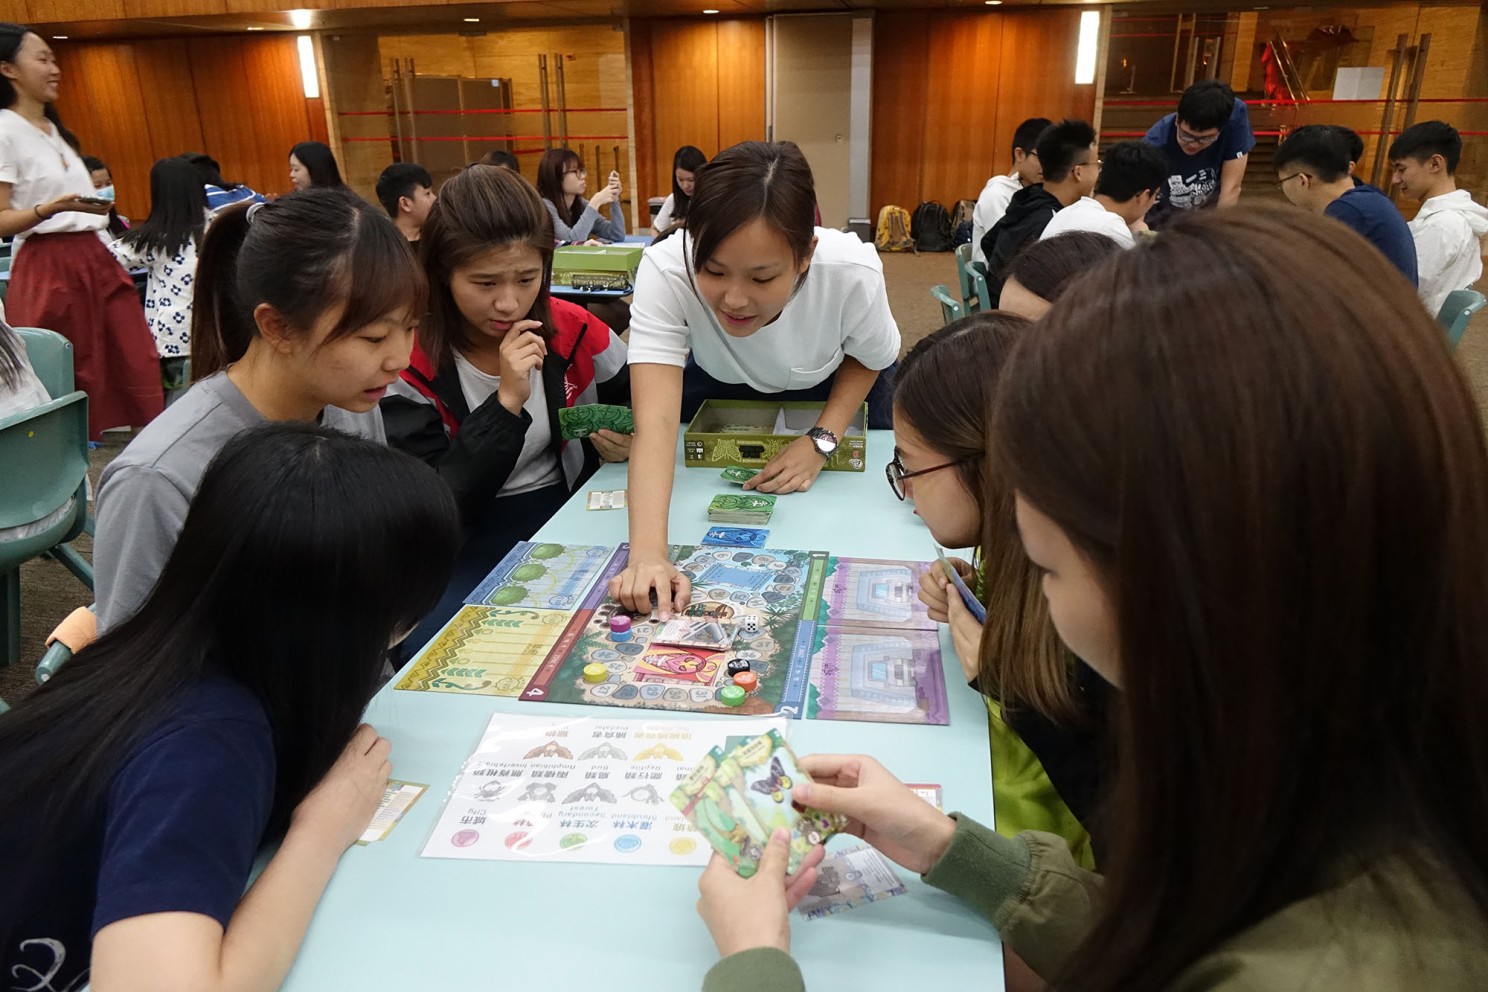 First science board game workshop at Lingnan manifests game-based learning